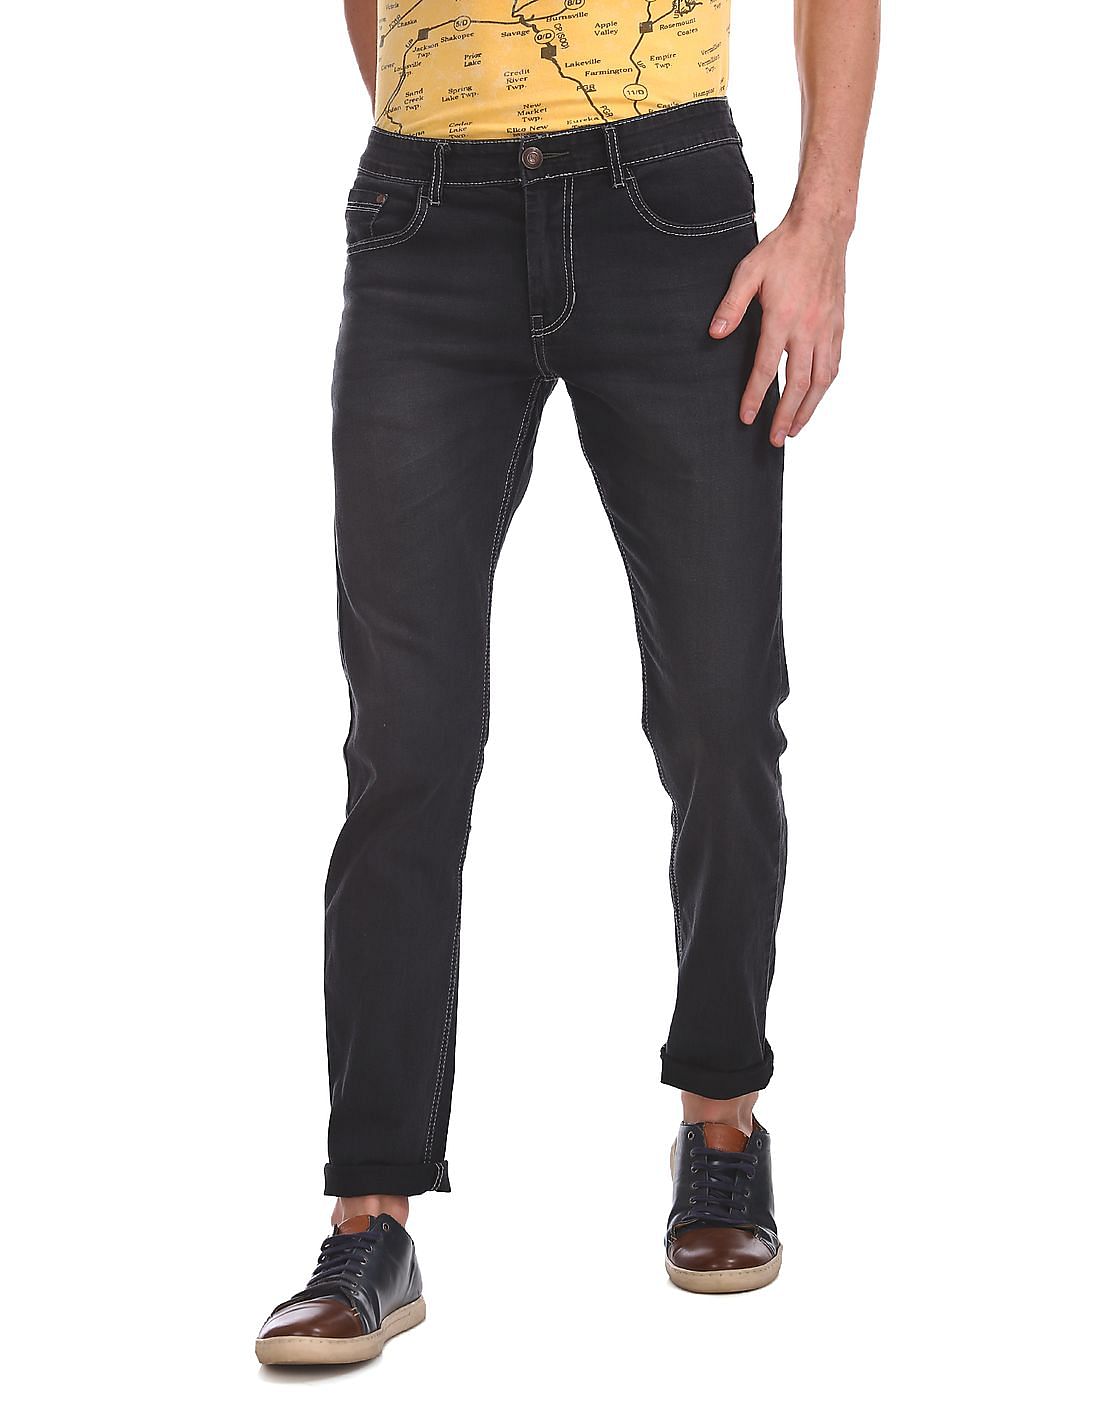 Buy Men Slim Fit Stone Wash Jeans online at NNNOW.com